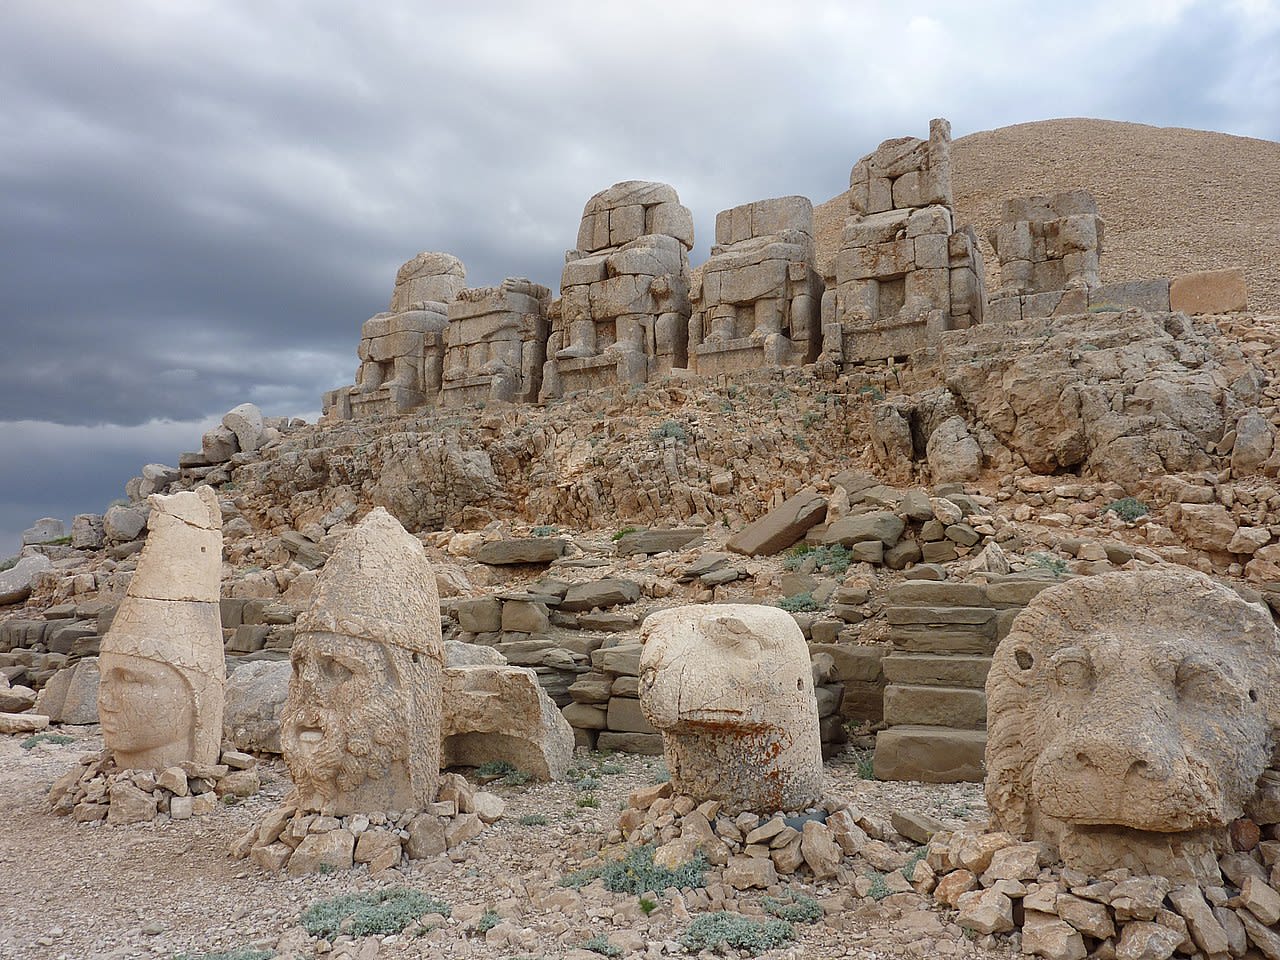 Statues on top of Mount Nemrut, Turkey - contructed in 62BCE by the King of Greco-Iranian Kingdom of Commagene, depicting Greek Gods, Iranian Gods, and the King's family